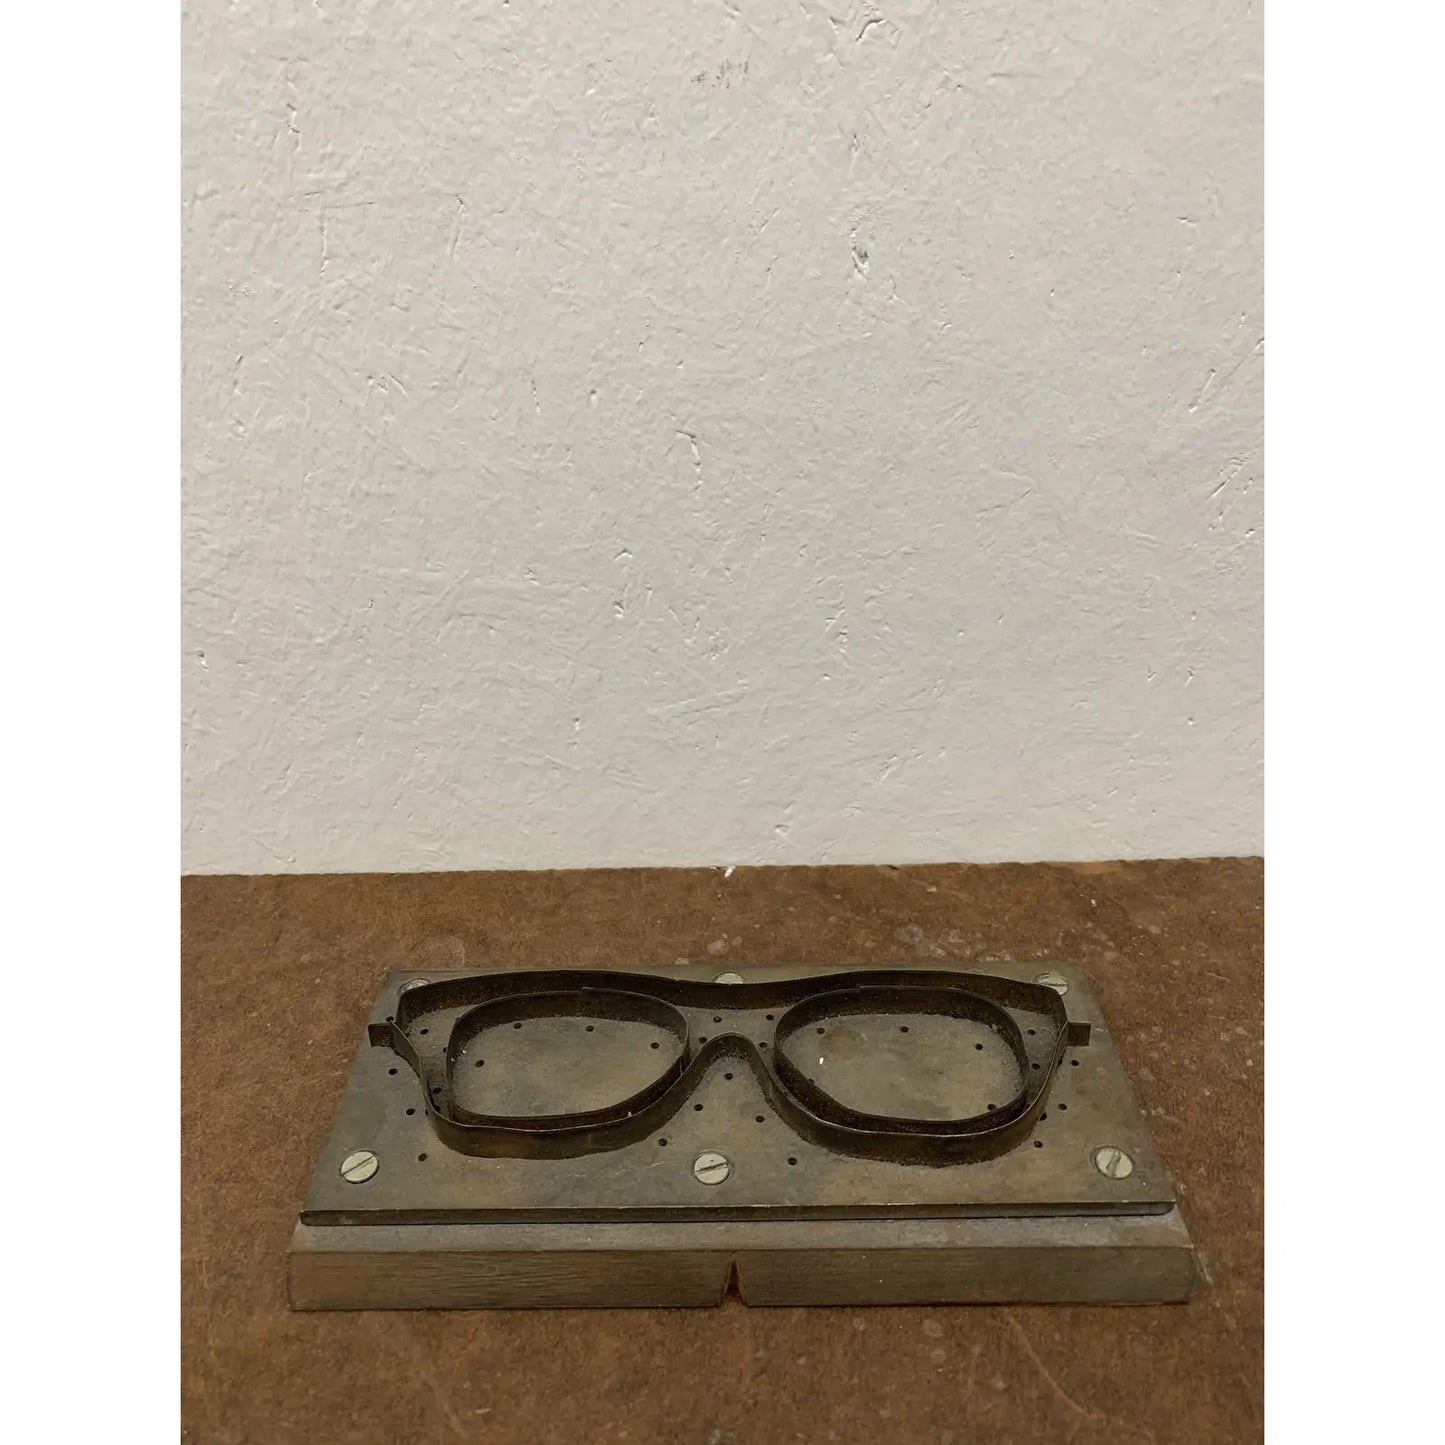 Vintage Industrial 1940’s French Eyeglass Mold